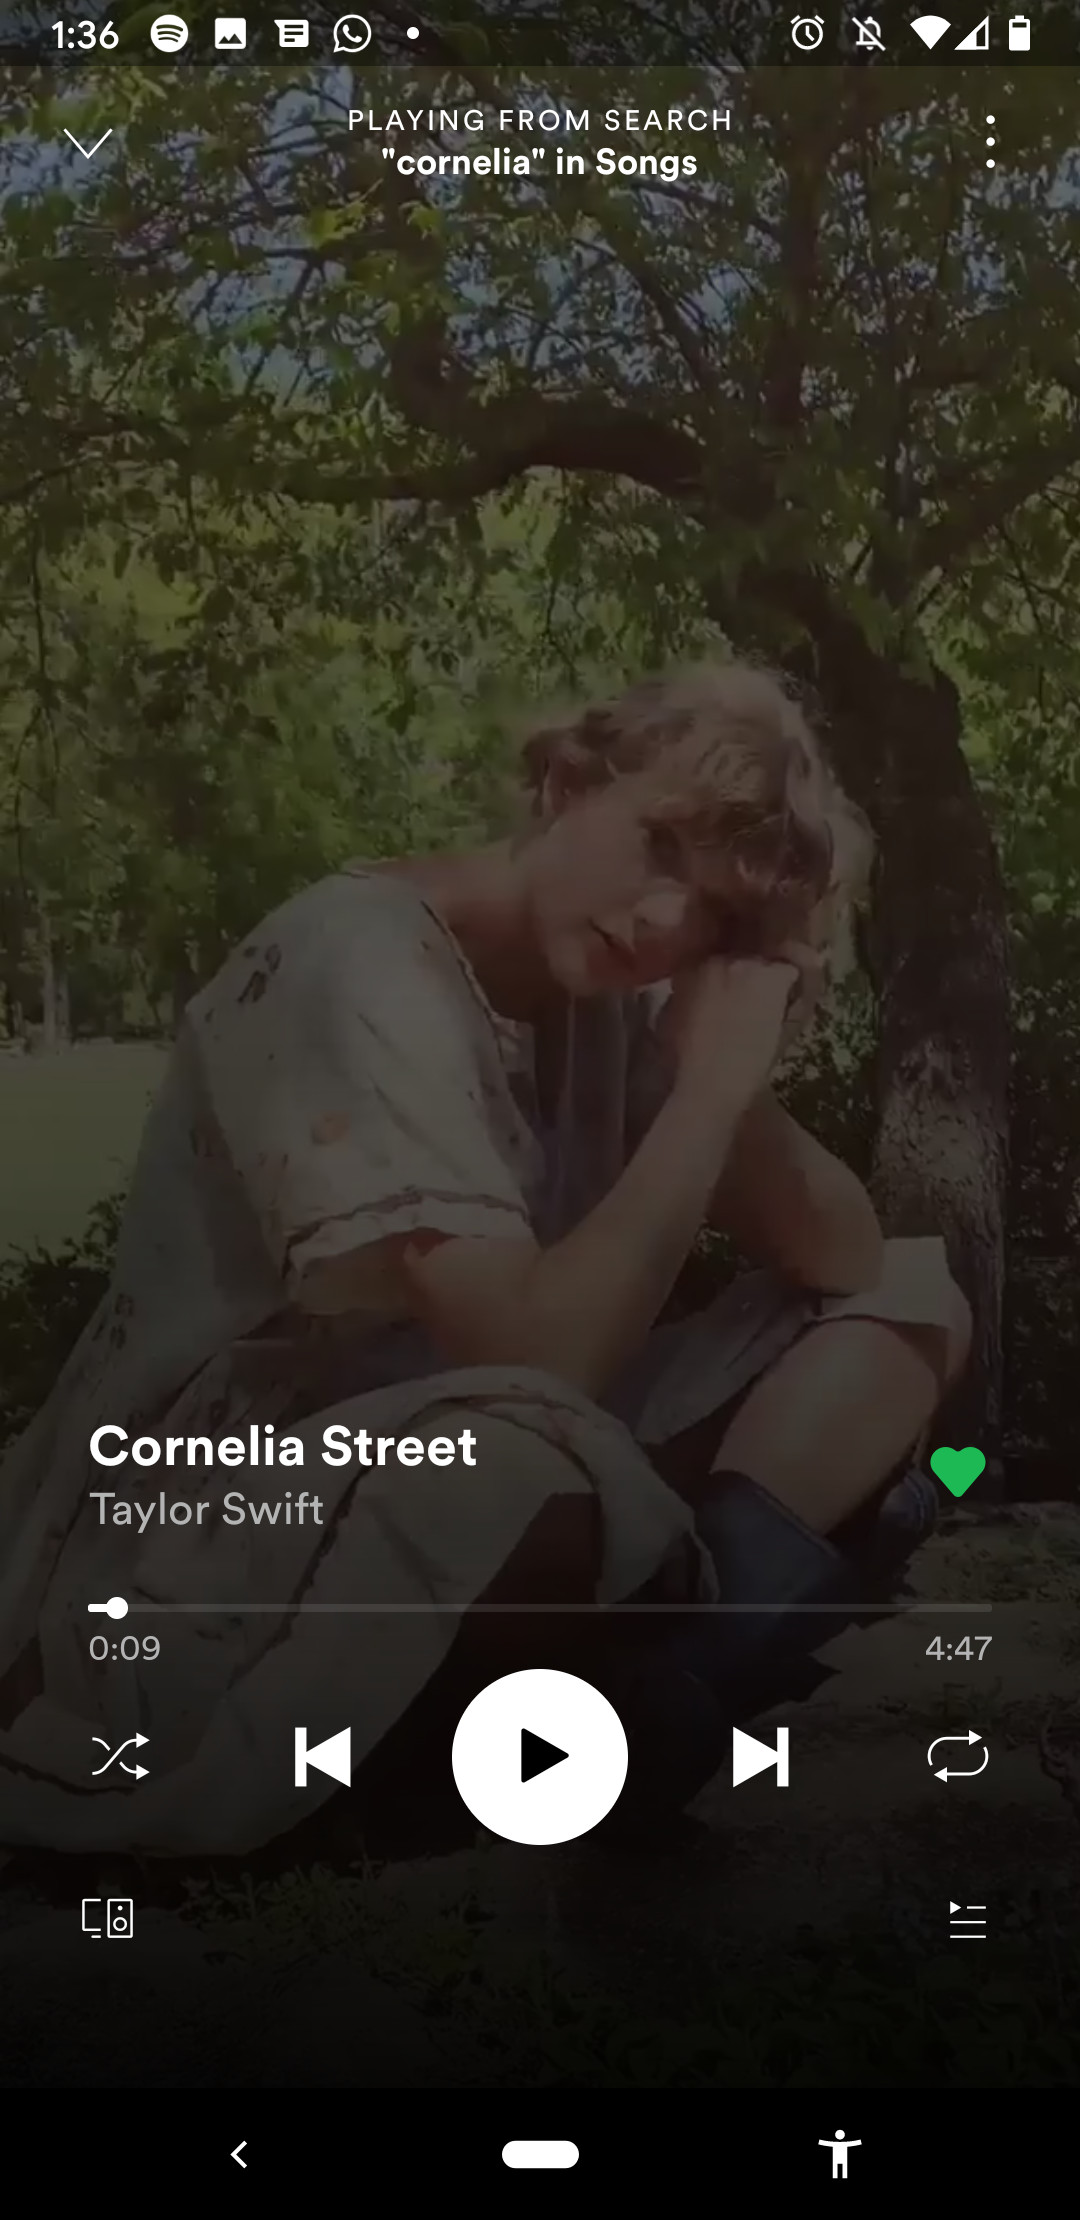 Screenshot of Spotify player with a still from the artist's video